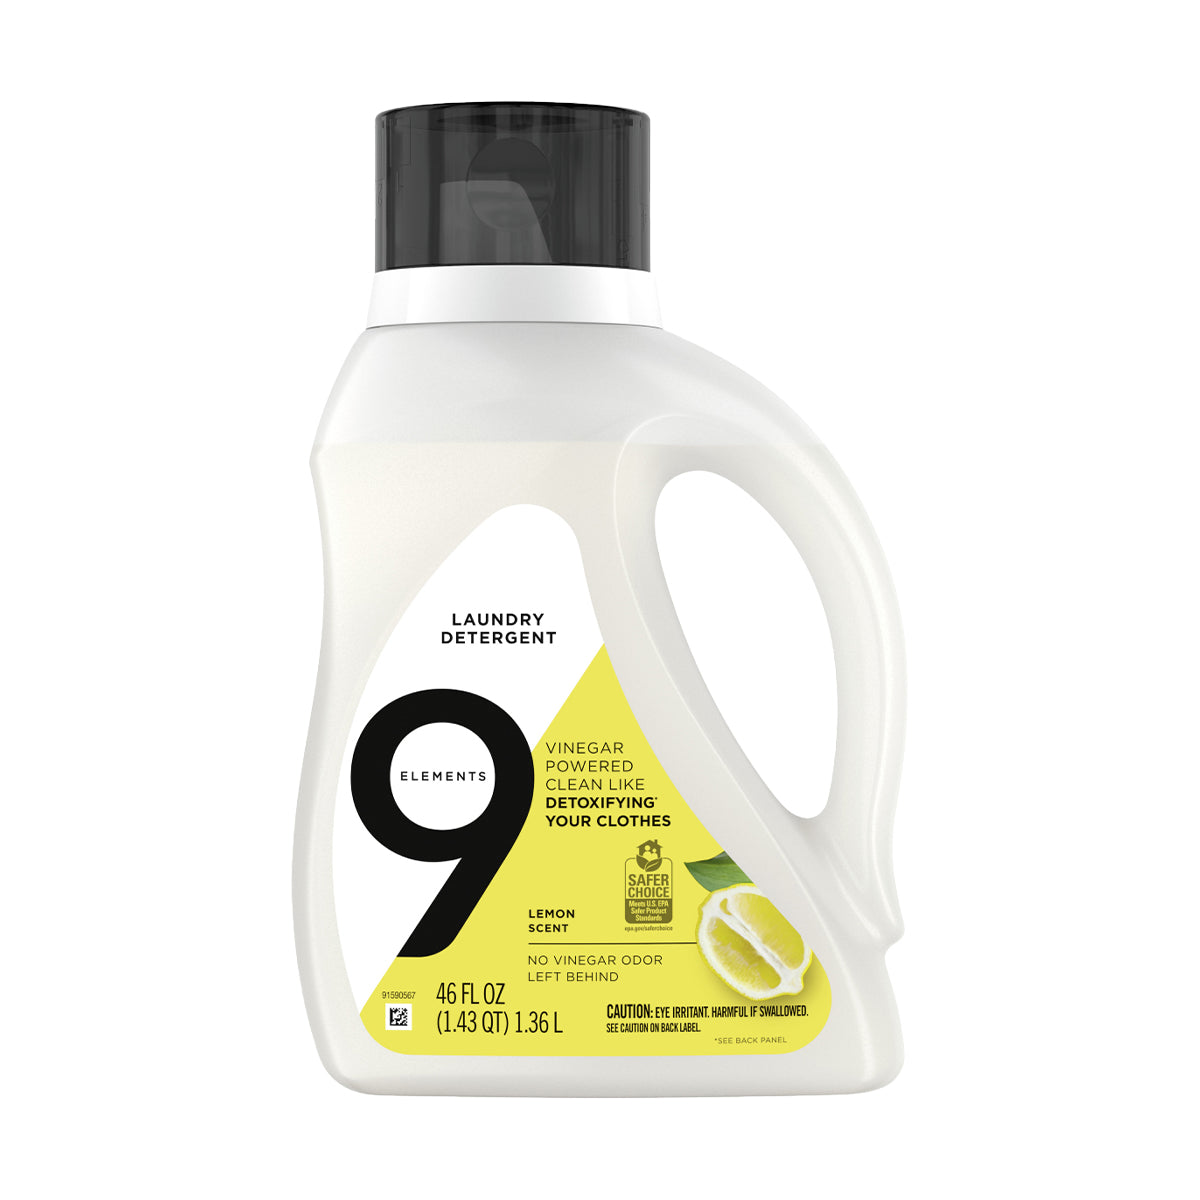 Detergente para ropa aroma Limón 9 Elements 1.36 lts